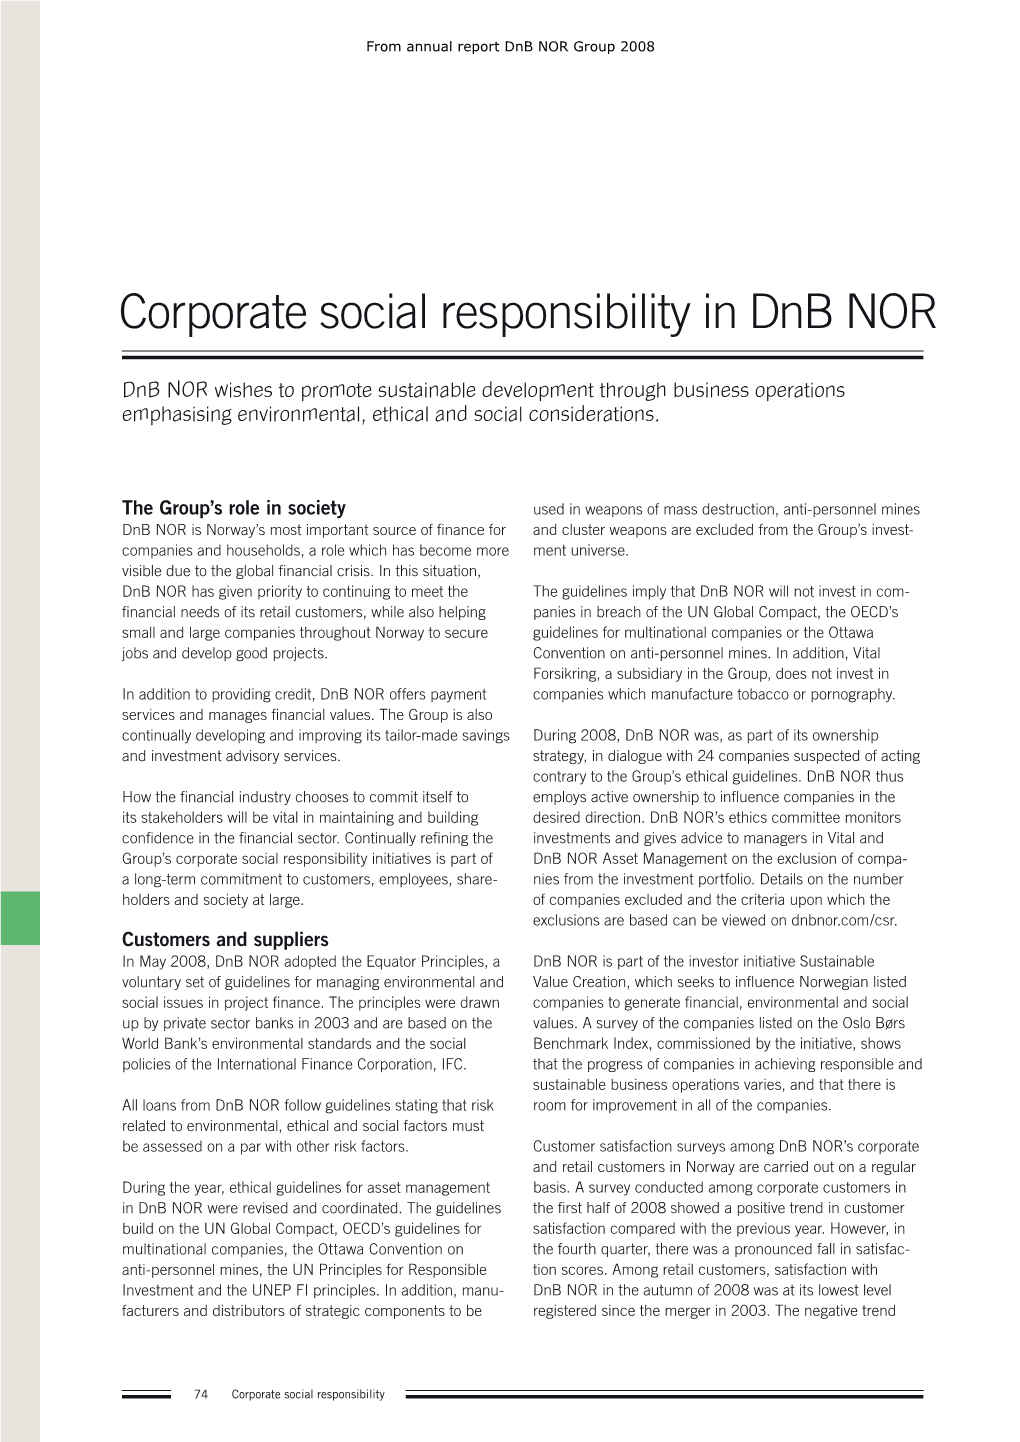 Corporate Social Responsibility in Dnb NOR